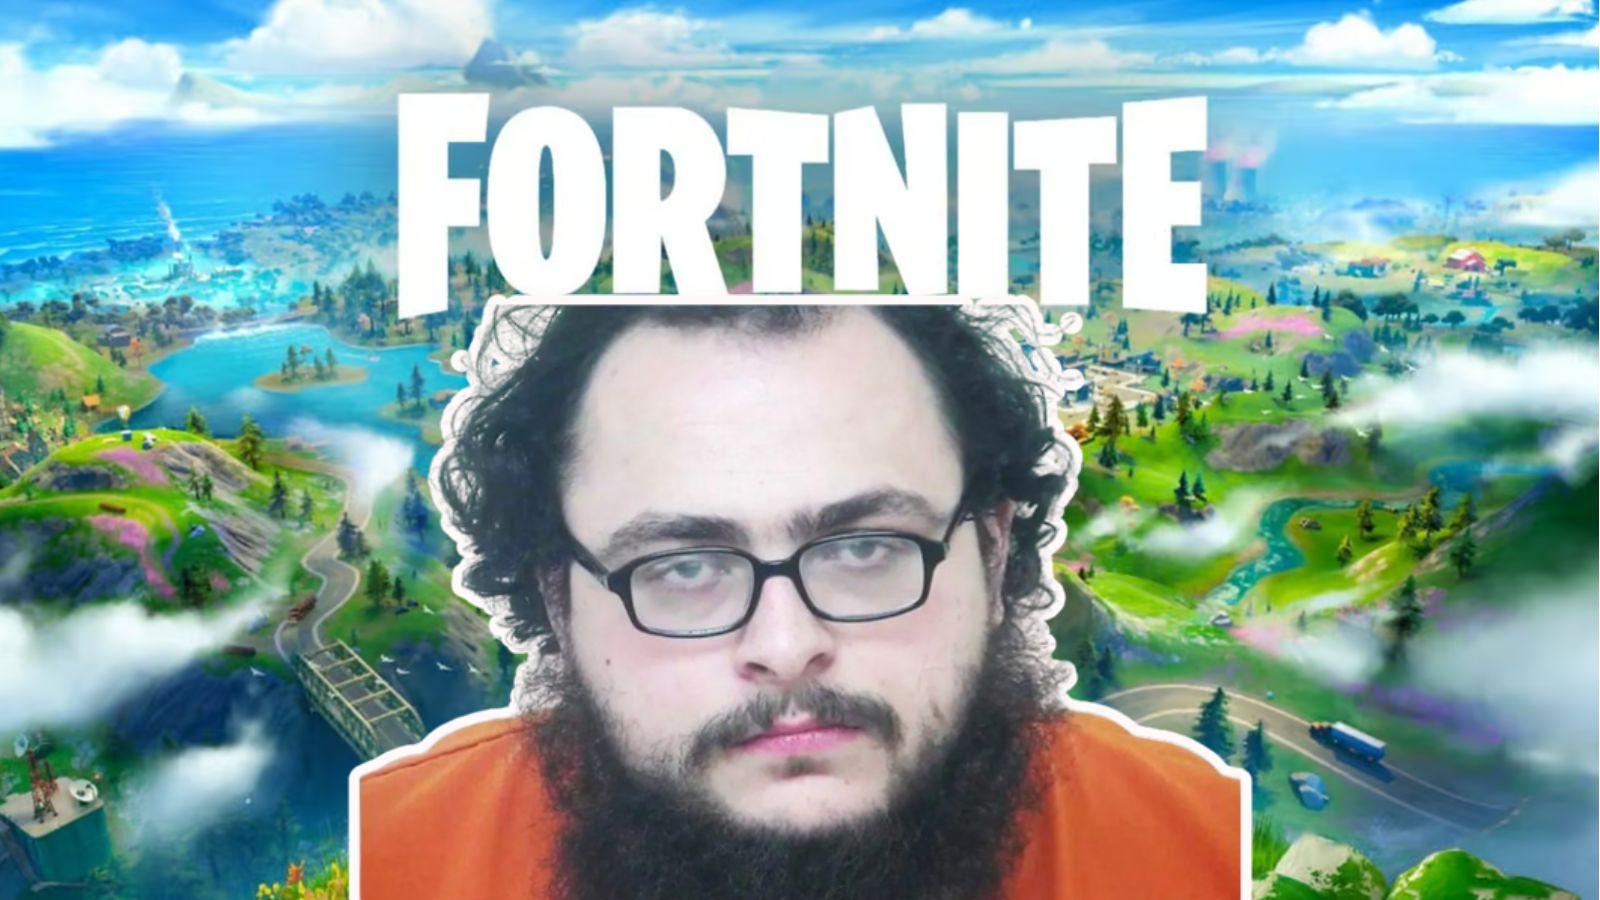 Nicolas Ranieri was arrested on child pornography charges through Fortnite